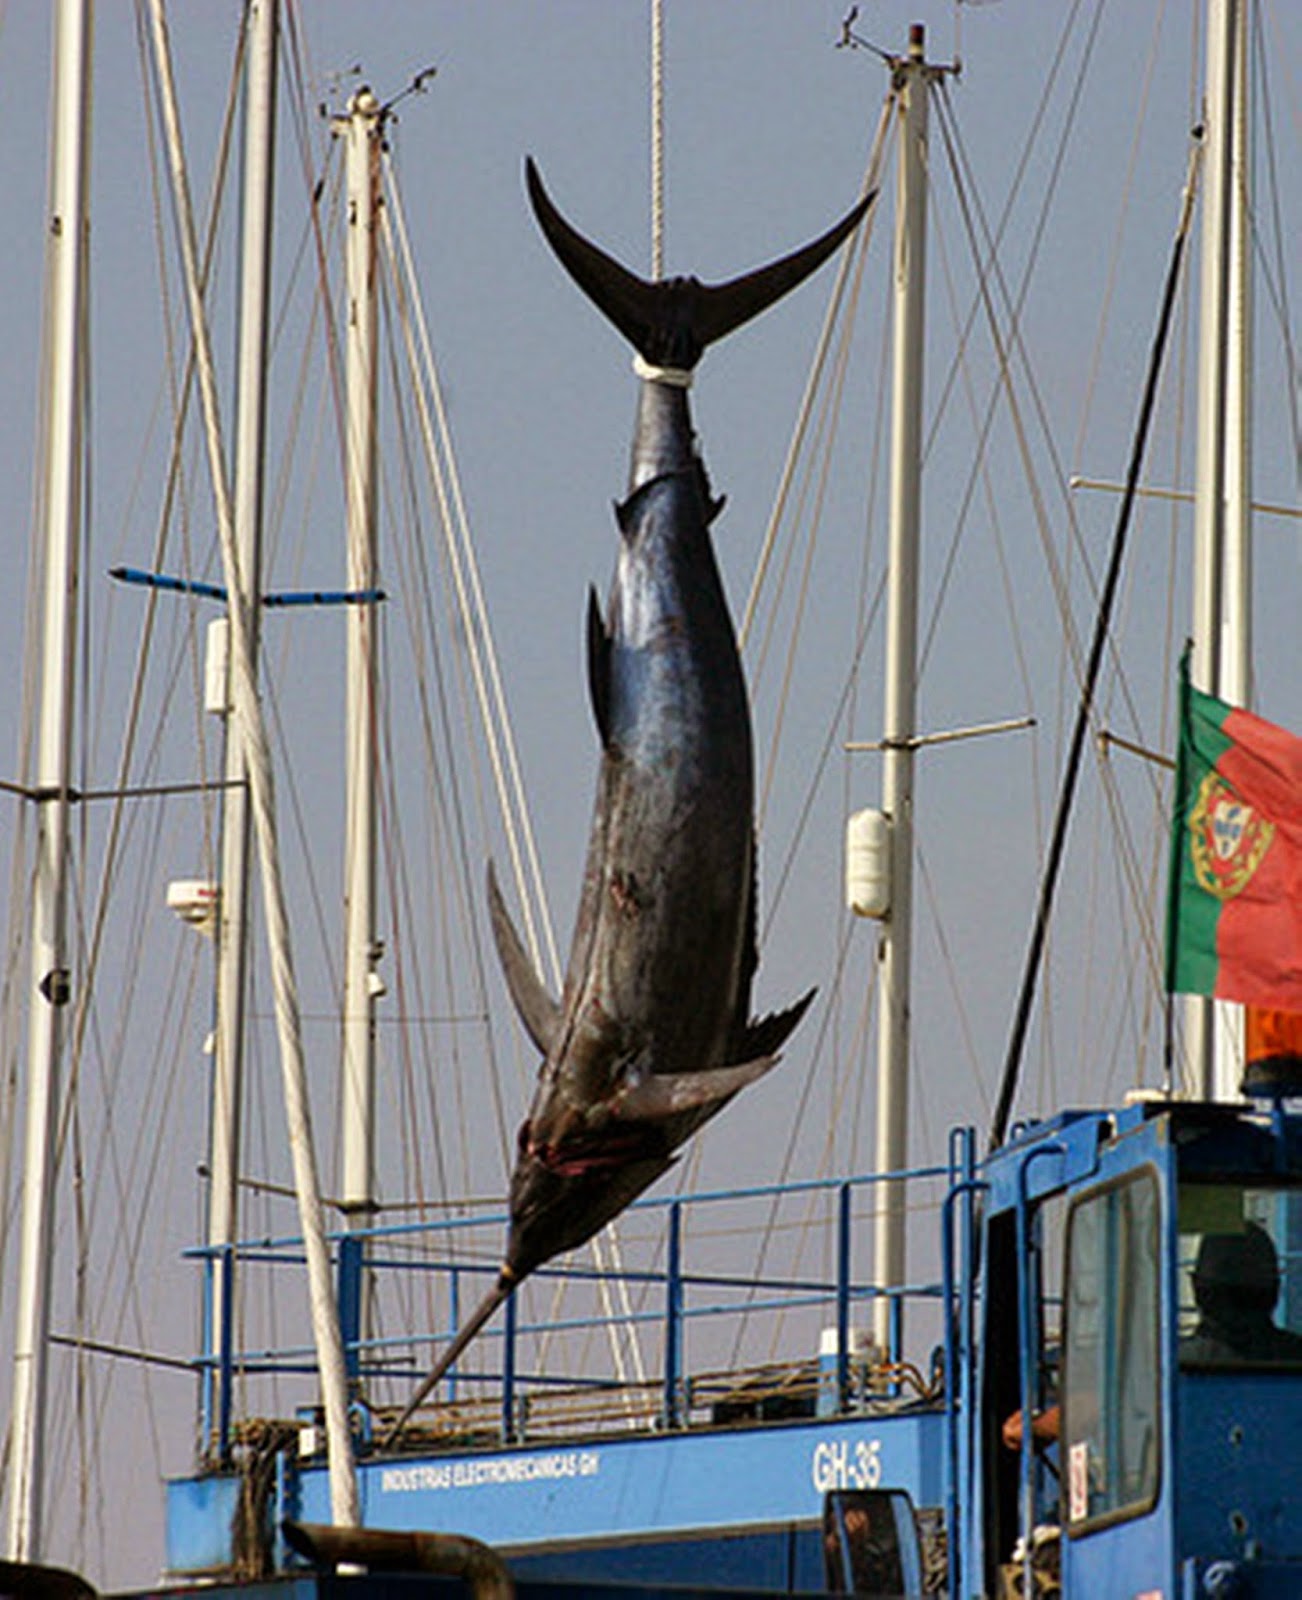 7 Swordfish Facts That We Swear Are True